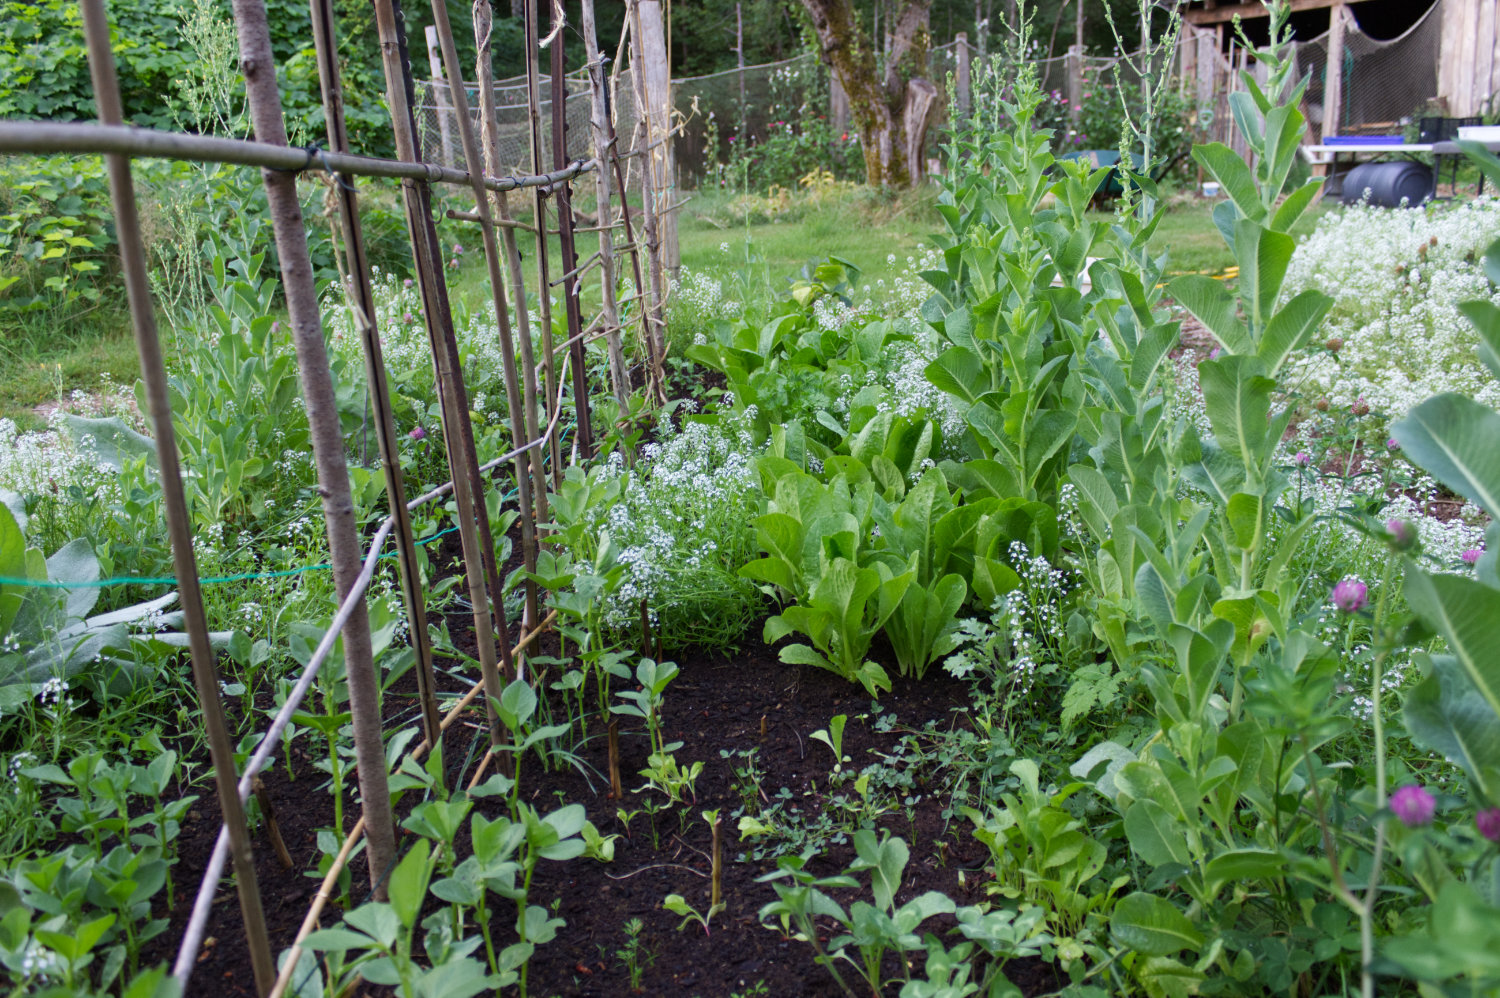 Mid shot of garden bed with lettuce going to seed and framed by alyssum.